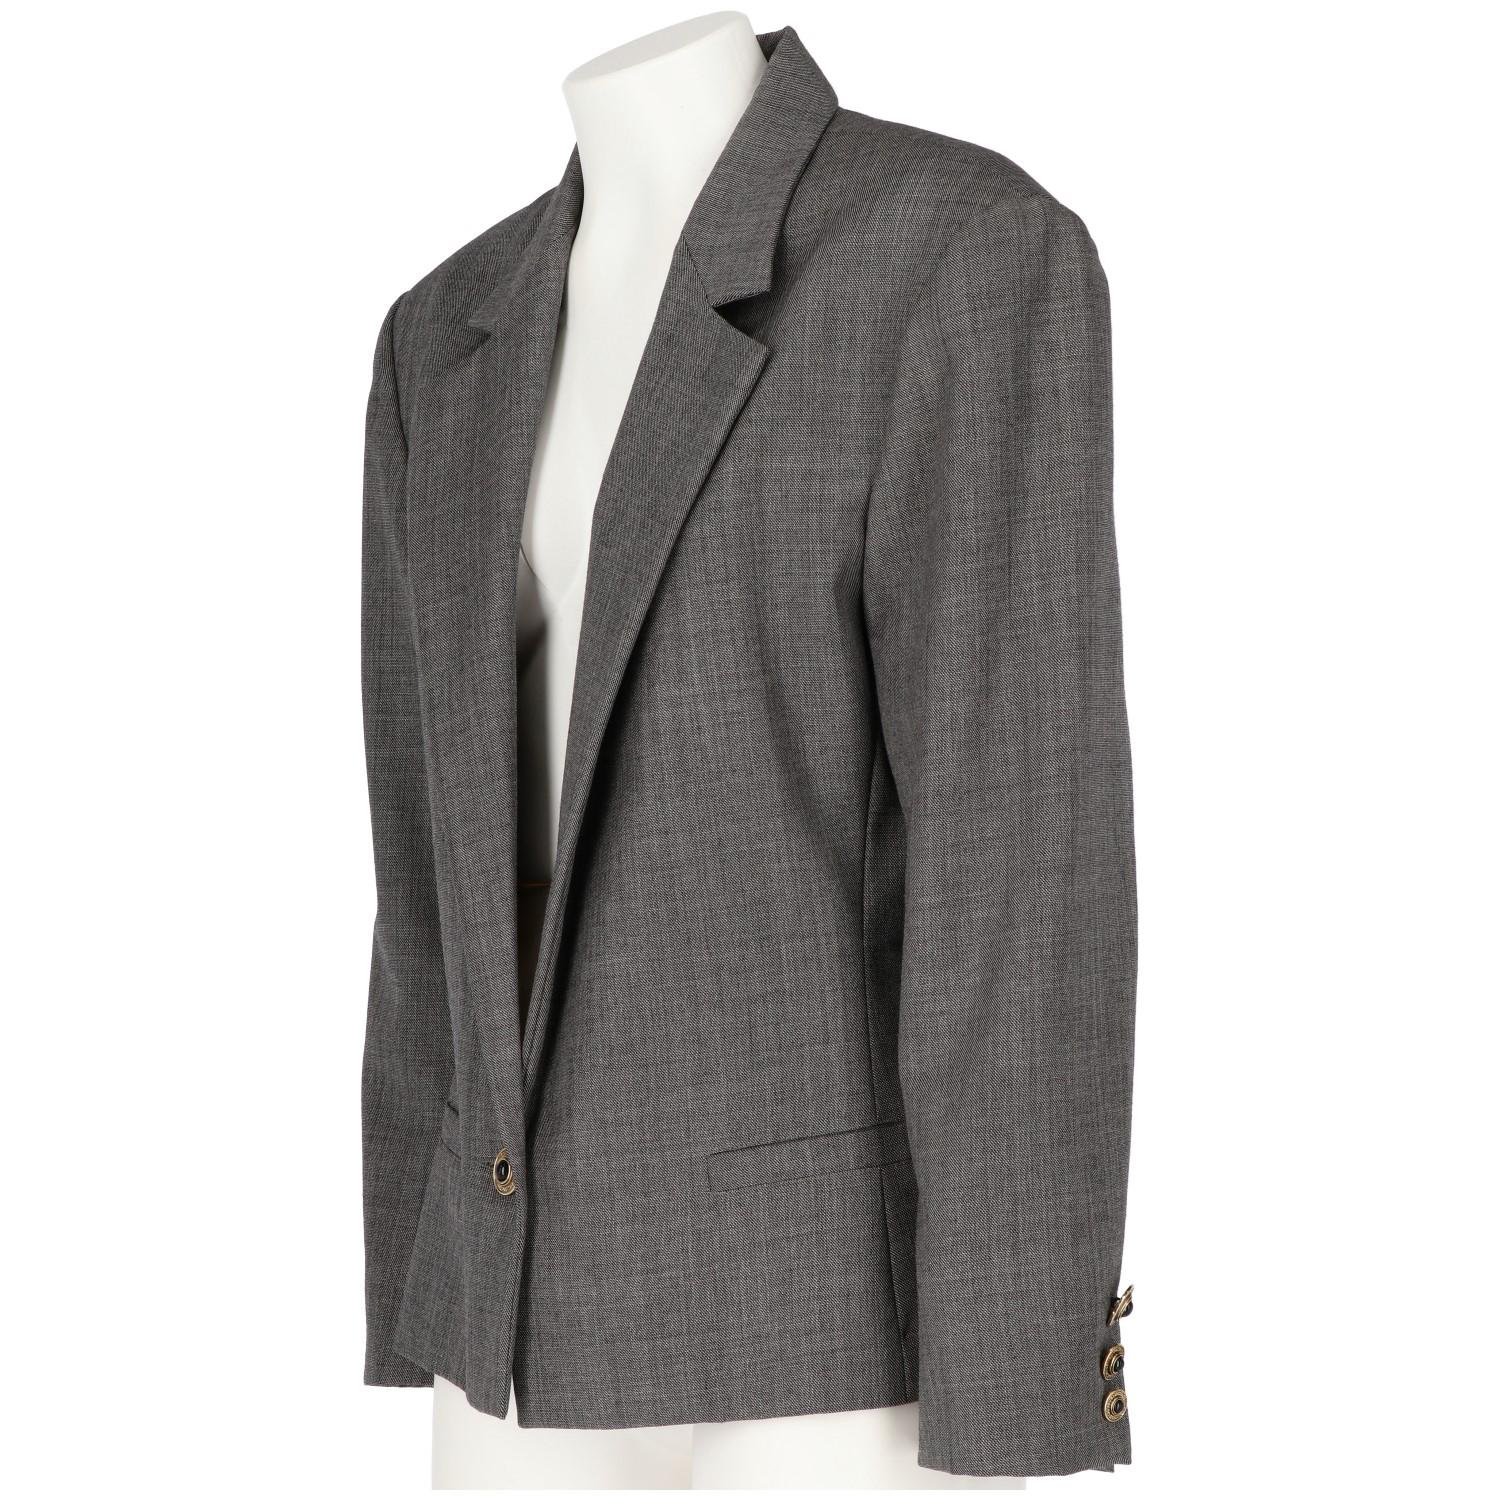 Classy grey virgin wool Versus jacket by Gianni Versace Vintage. It features a single decorated button fastening, peaked lapels, front welt pockets, long sleeves, button cuffs and a straight hem. The item is vintage, it was produced in the 80s and